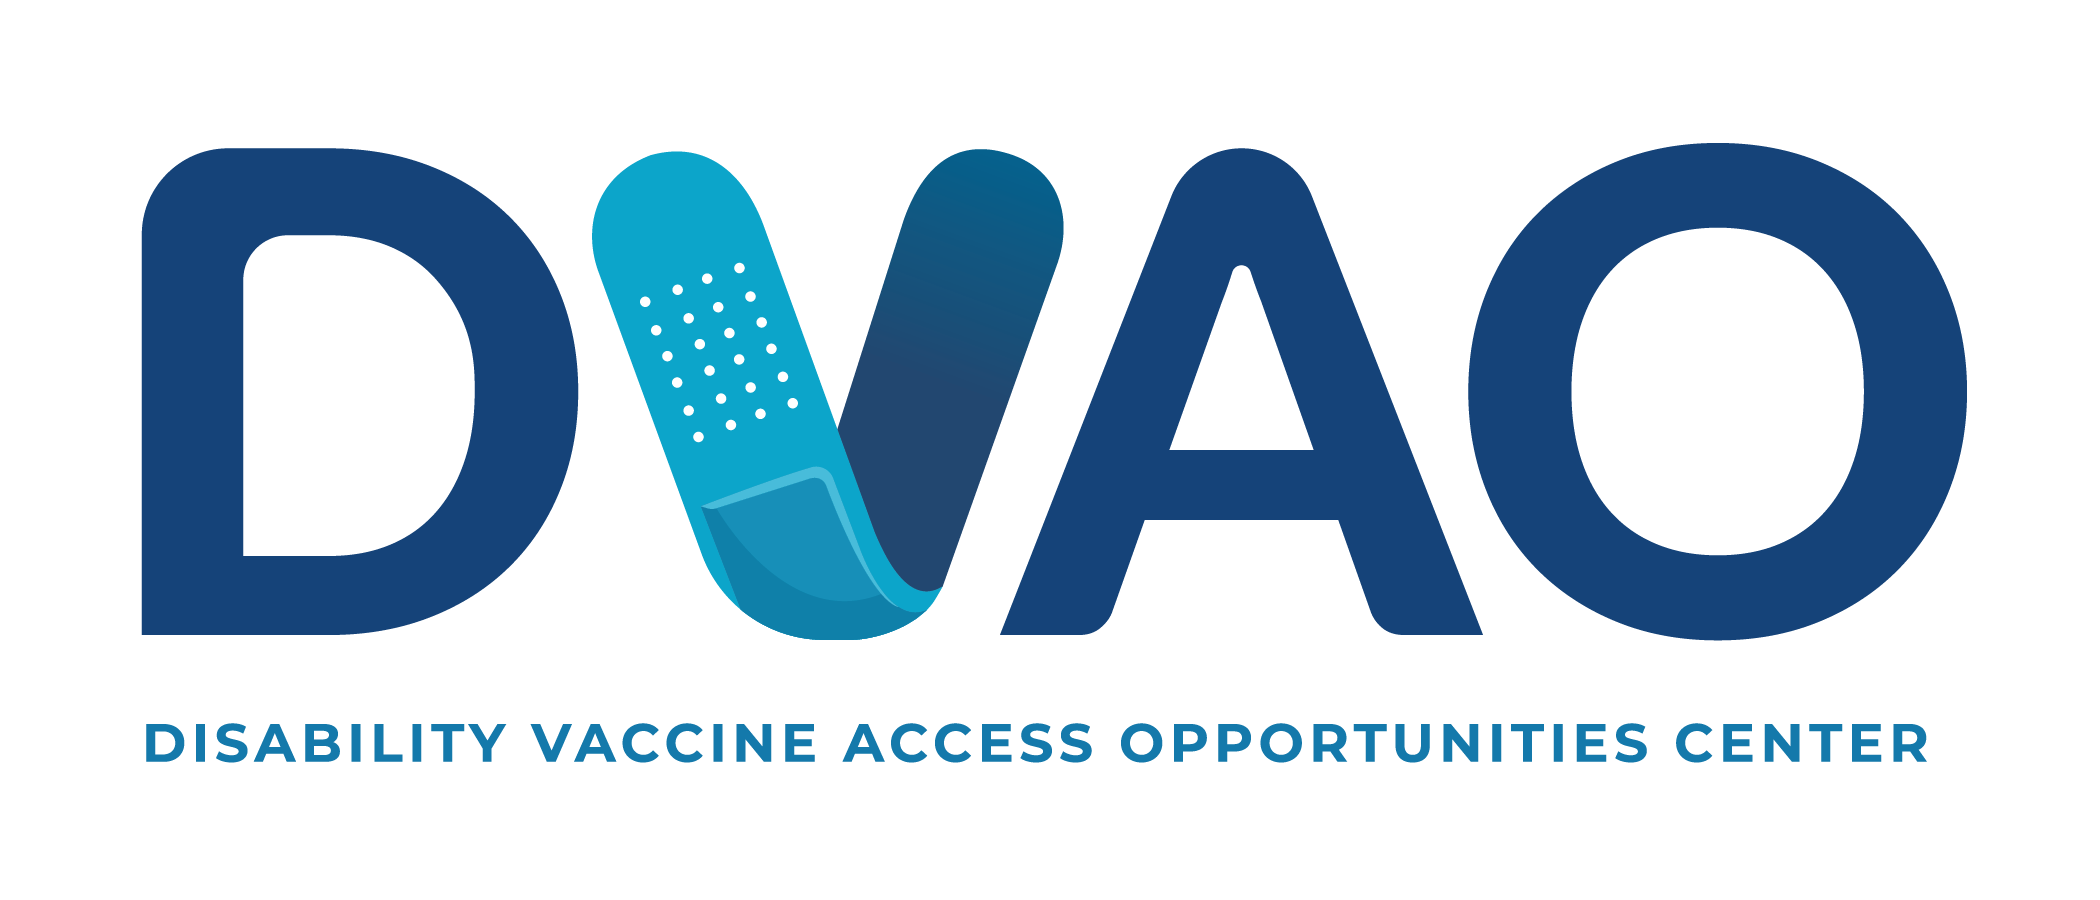 Disability Vaccine Access Opportunities Center